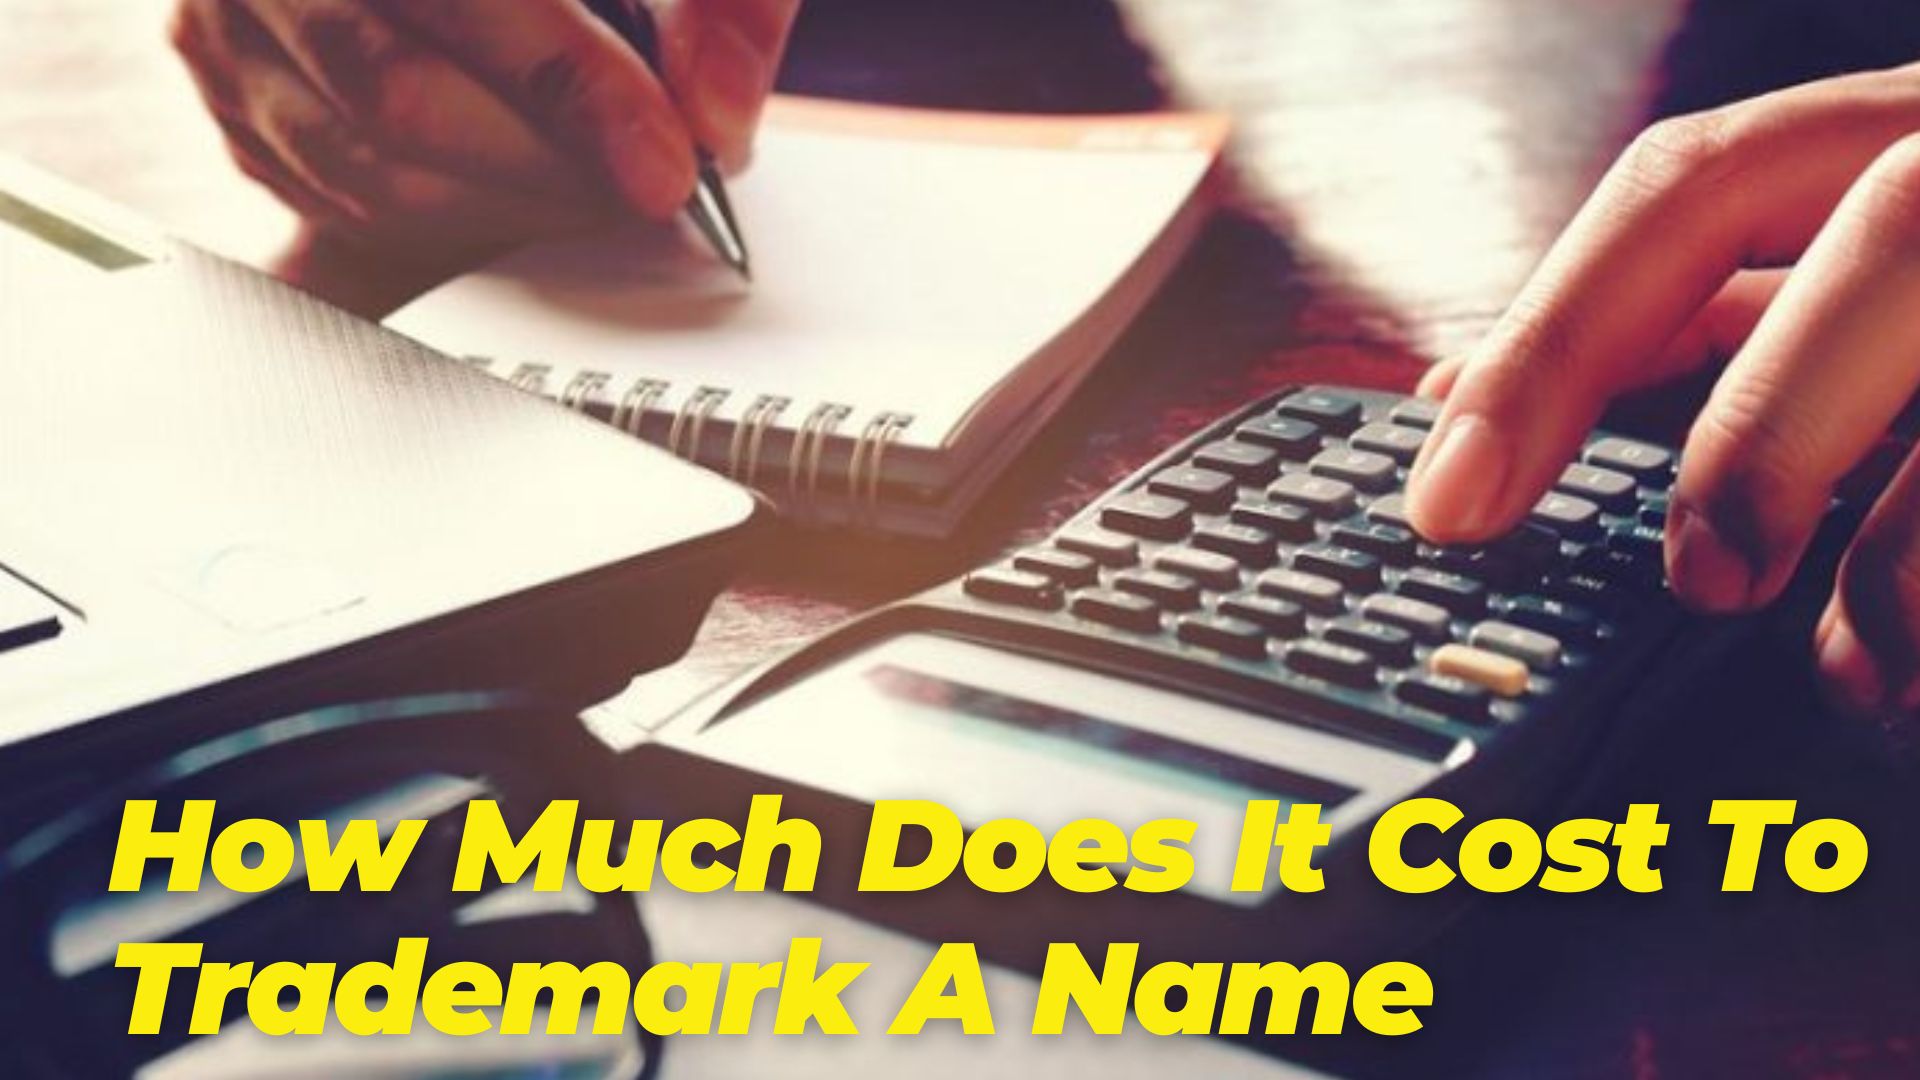 How Much Does It Cost To Trademark A Name